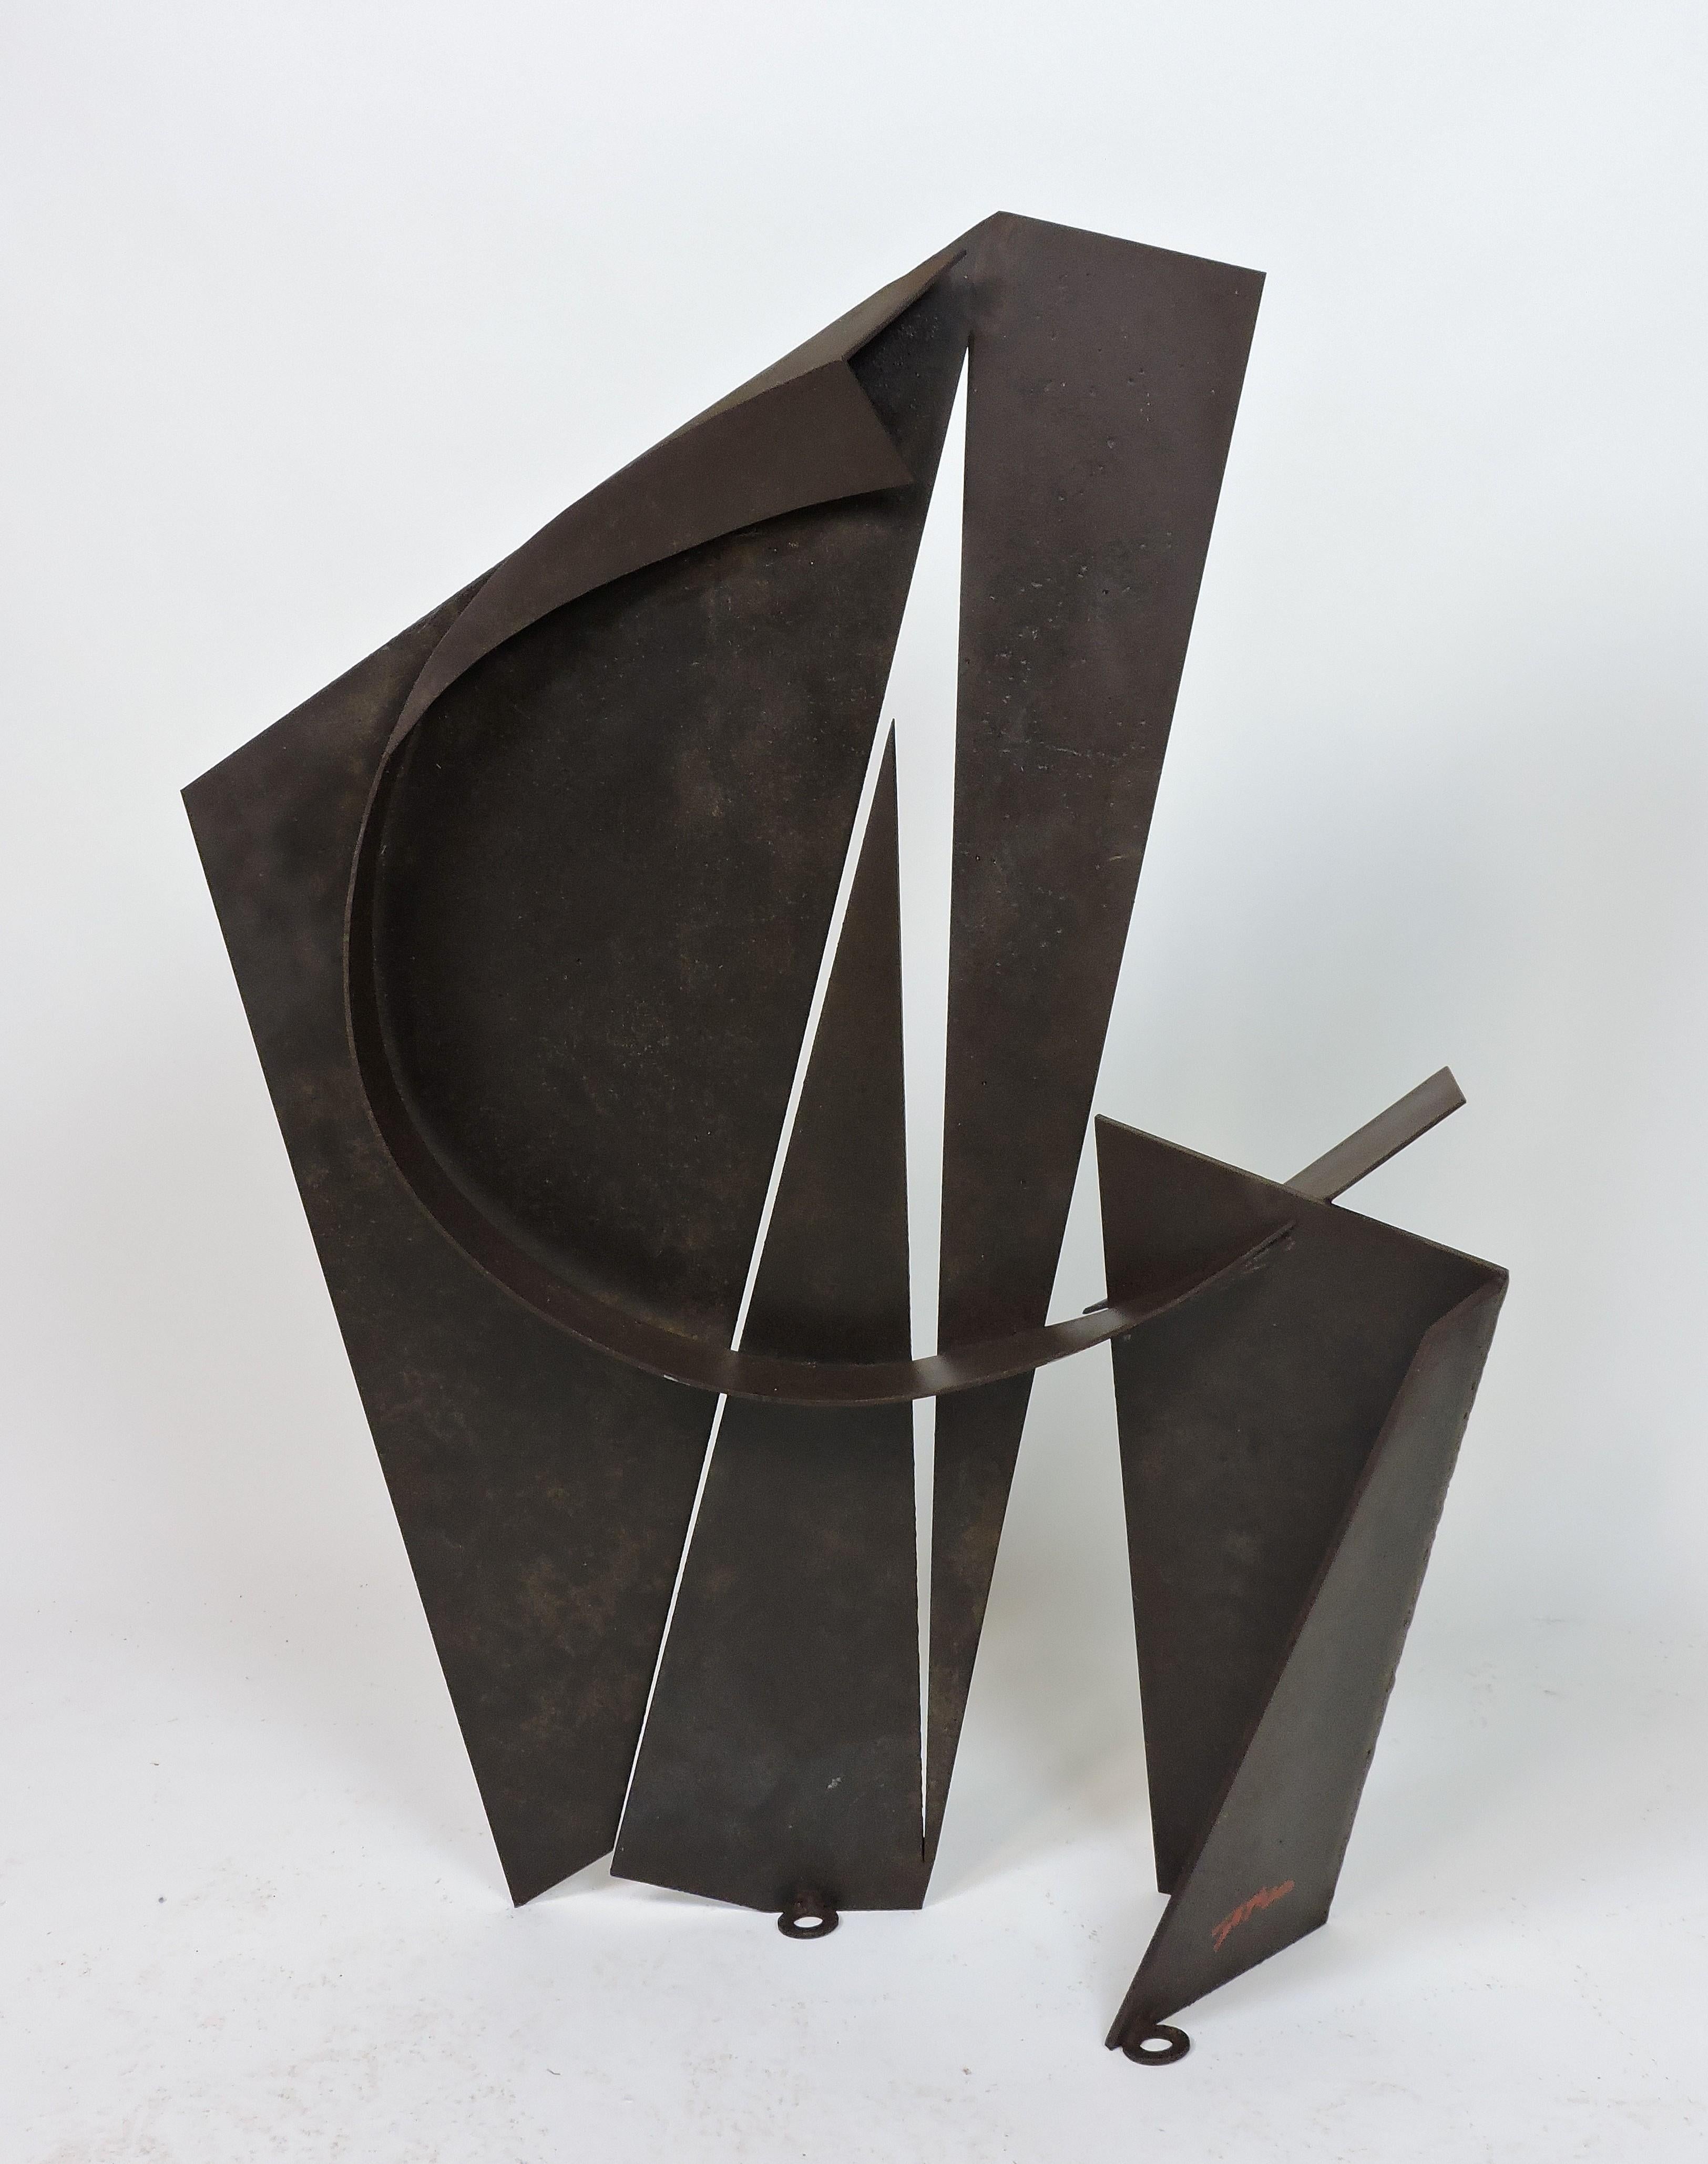 Abstract Welded Geometric Steel Sculpture by David Tothero 2